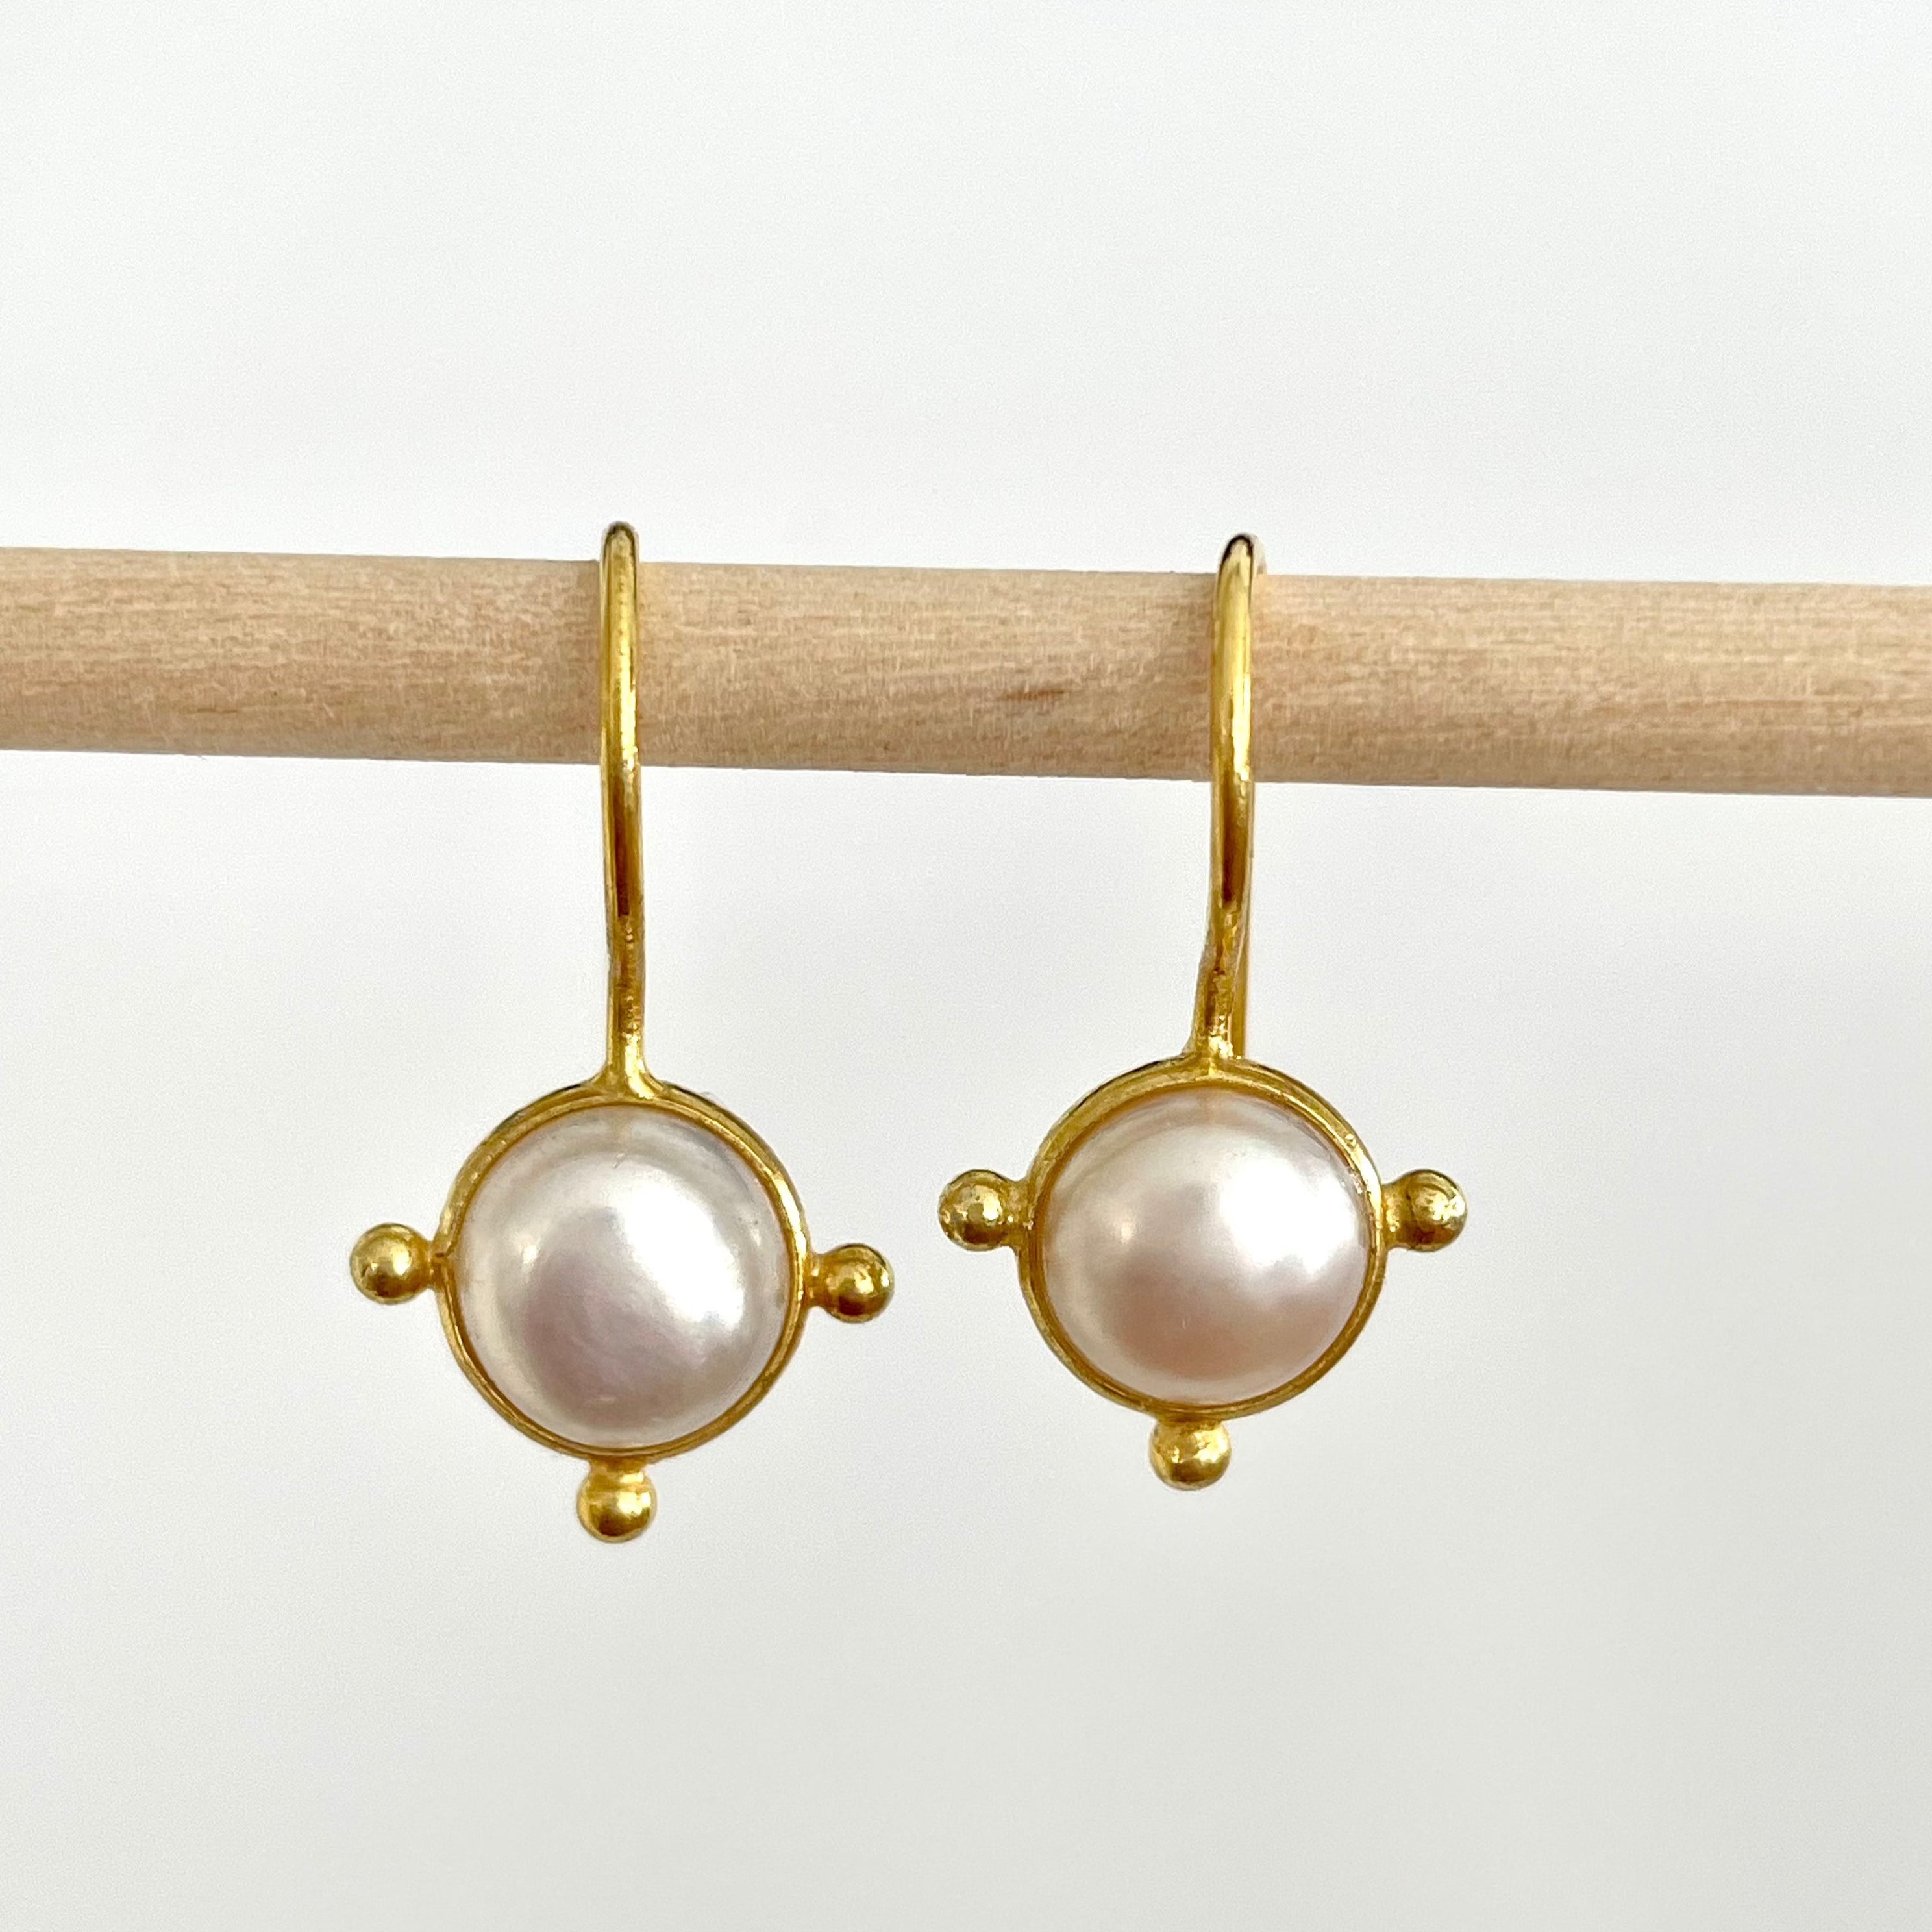 Demi Pearl Earrings - 18ct Gold PLated